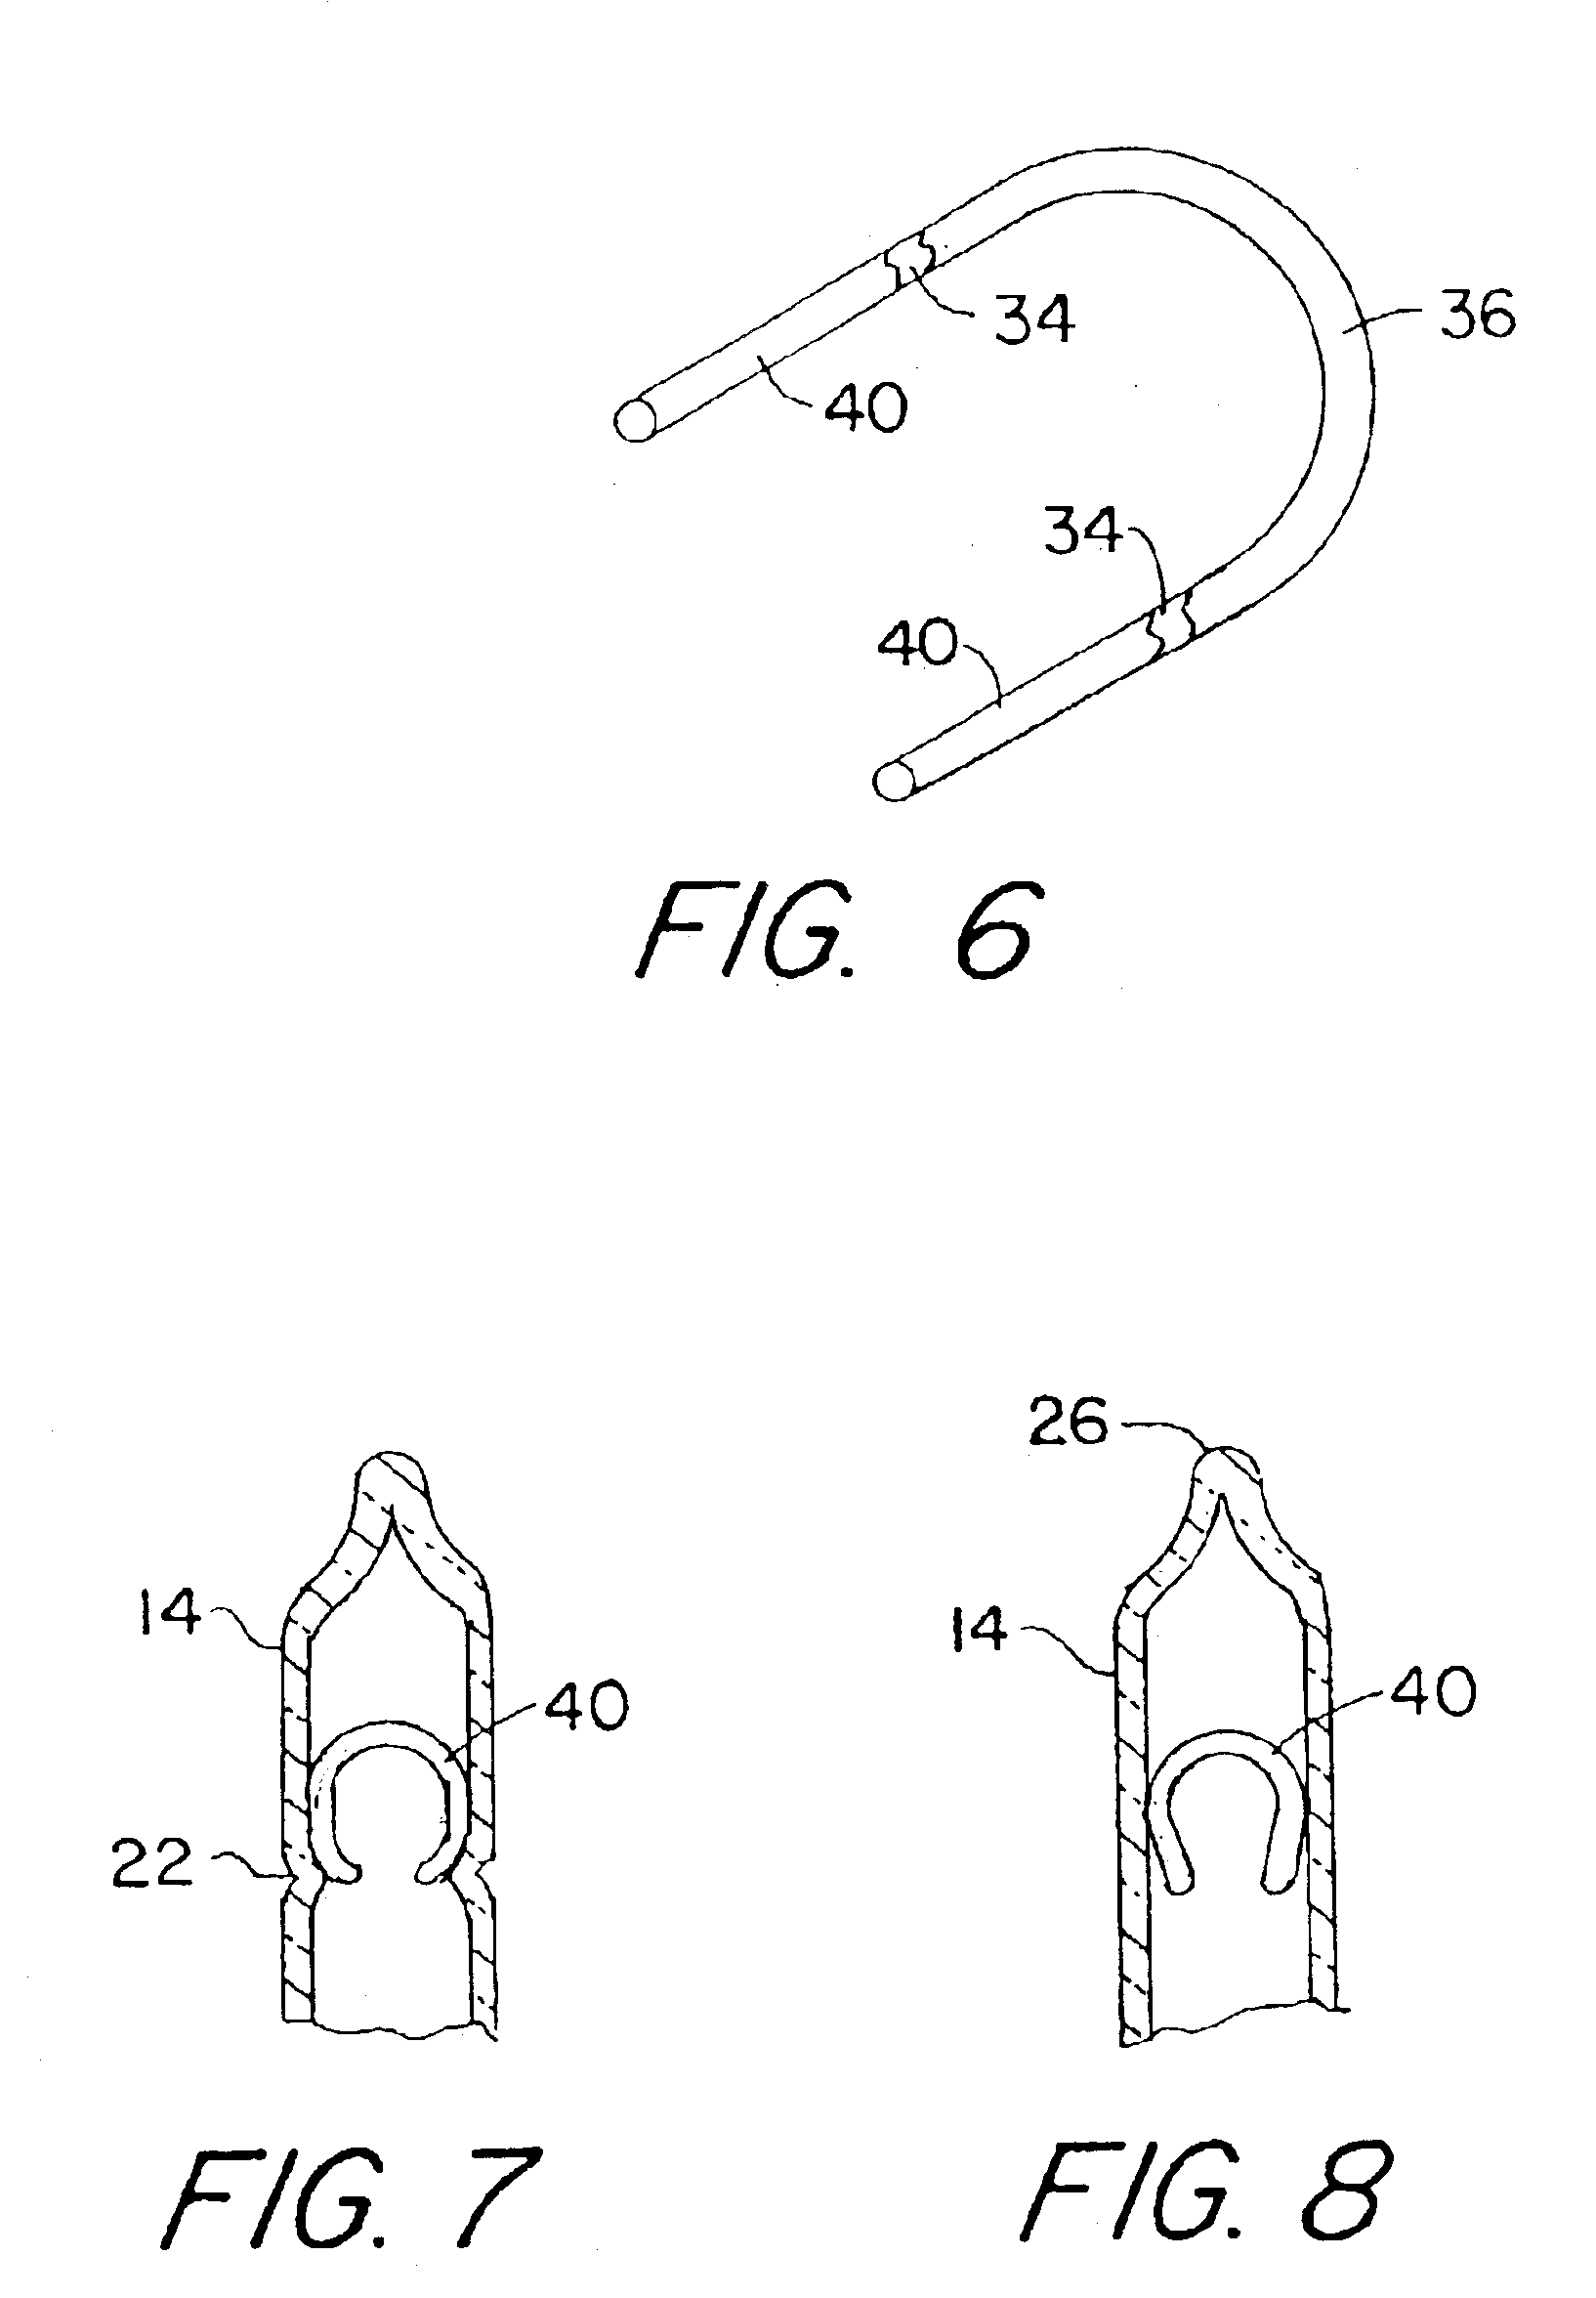 Method for introducing mercury into a fluorescent lamp during manufacture and a mercury carrier body facilitating such method